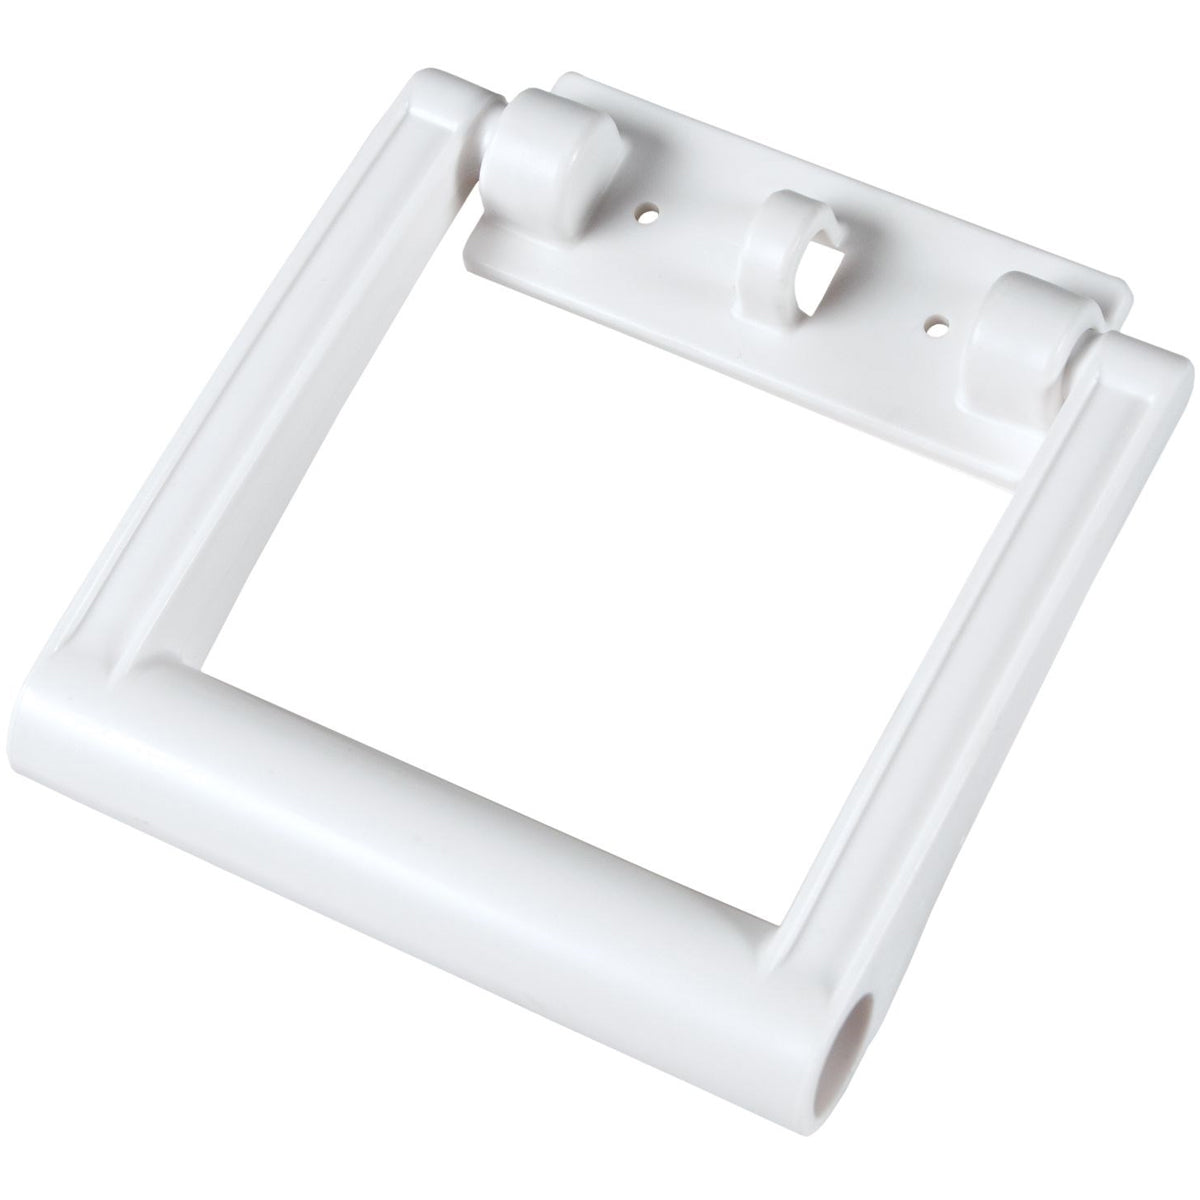 IGLOO Replacement 25-75 Quart Swing-Up Cooler Handles - White IGLOO